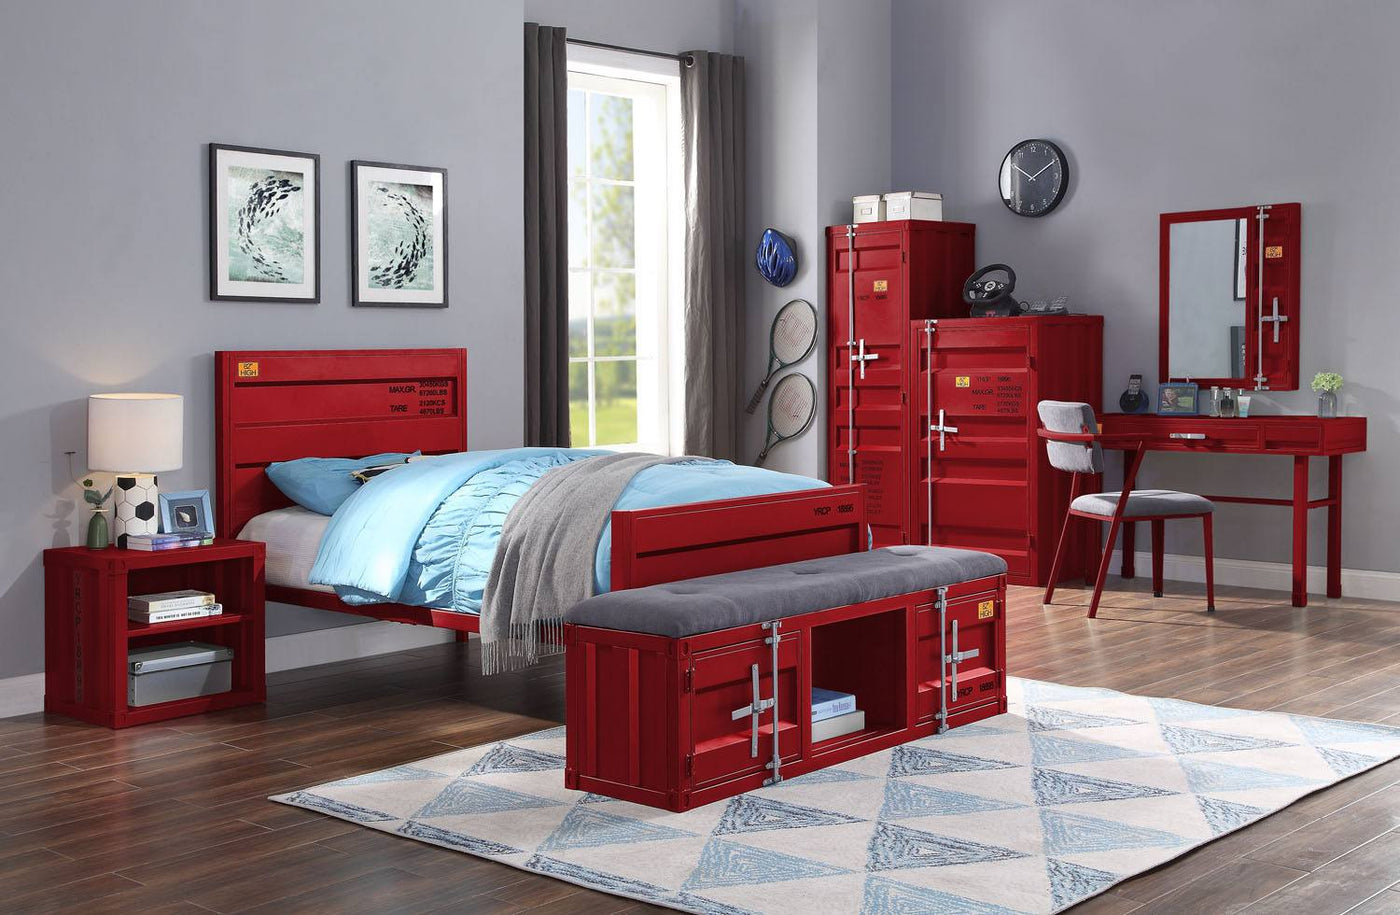 Konto Industrial Chest - Red